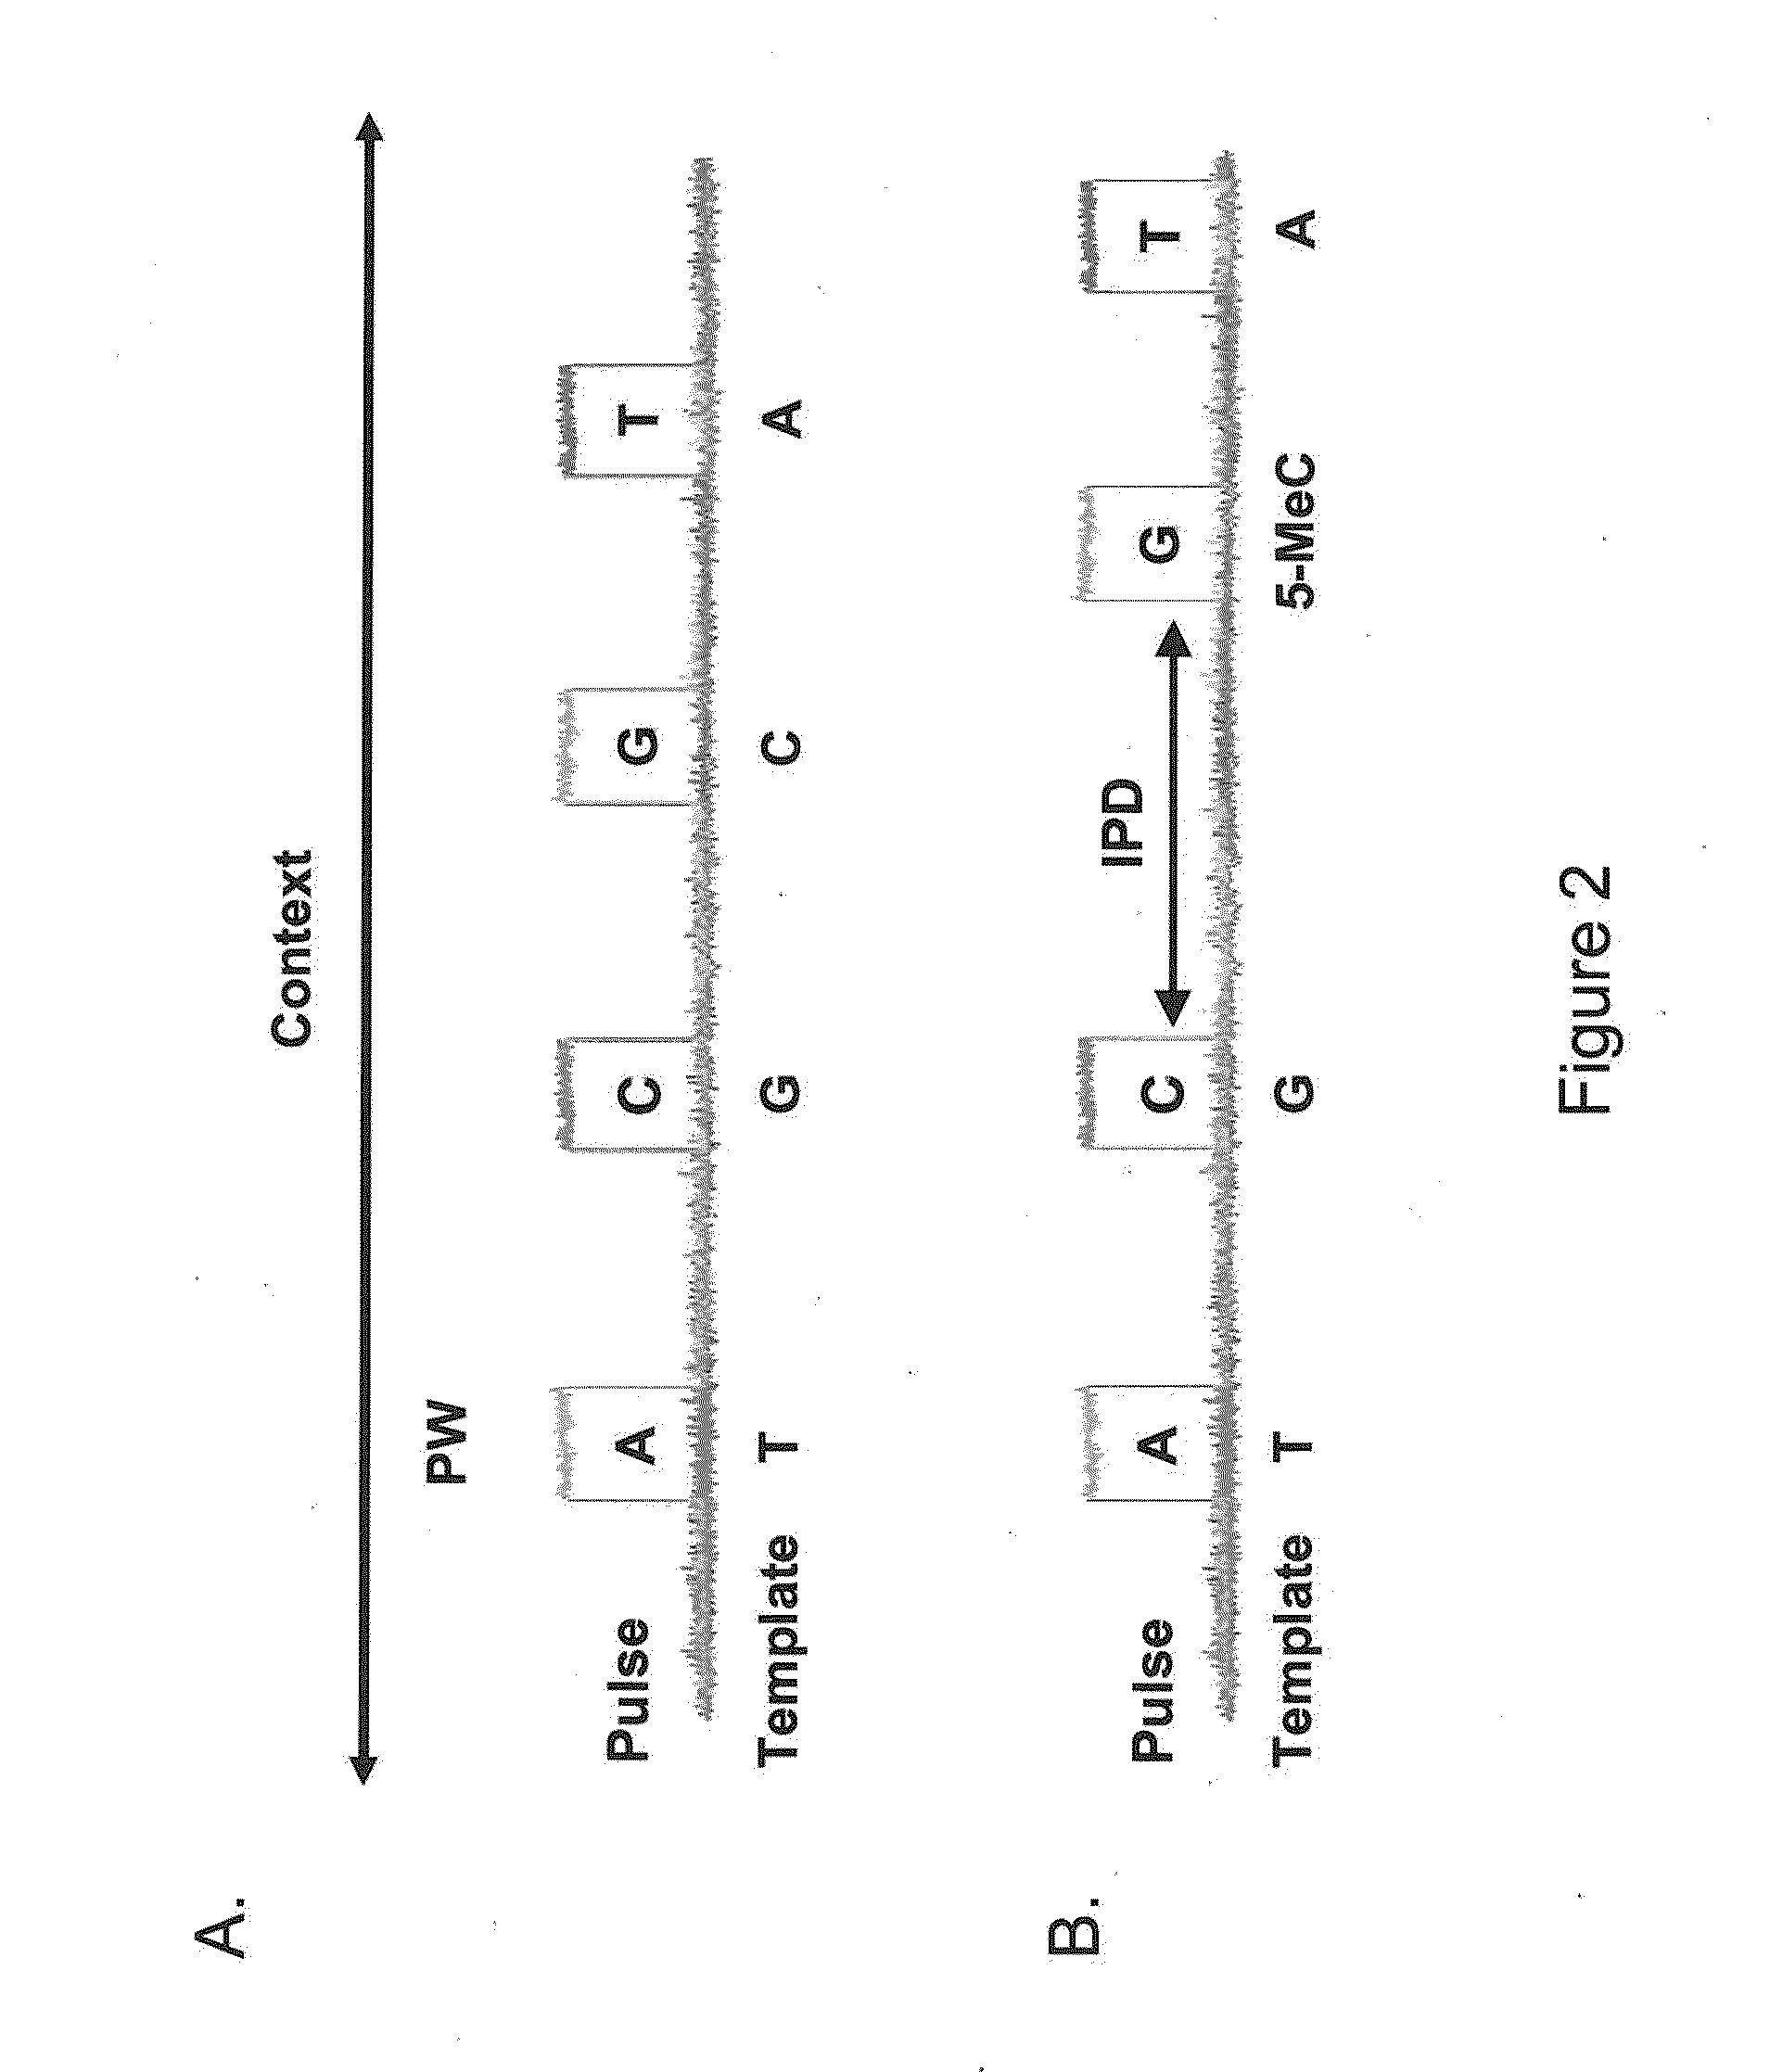 Classification of nucleic acid templates